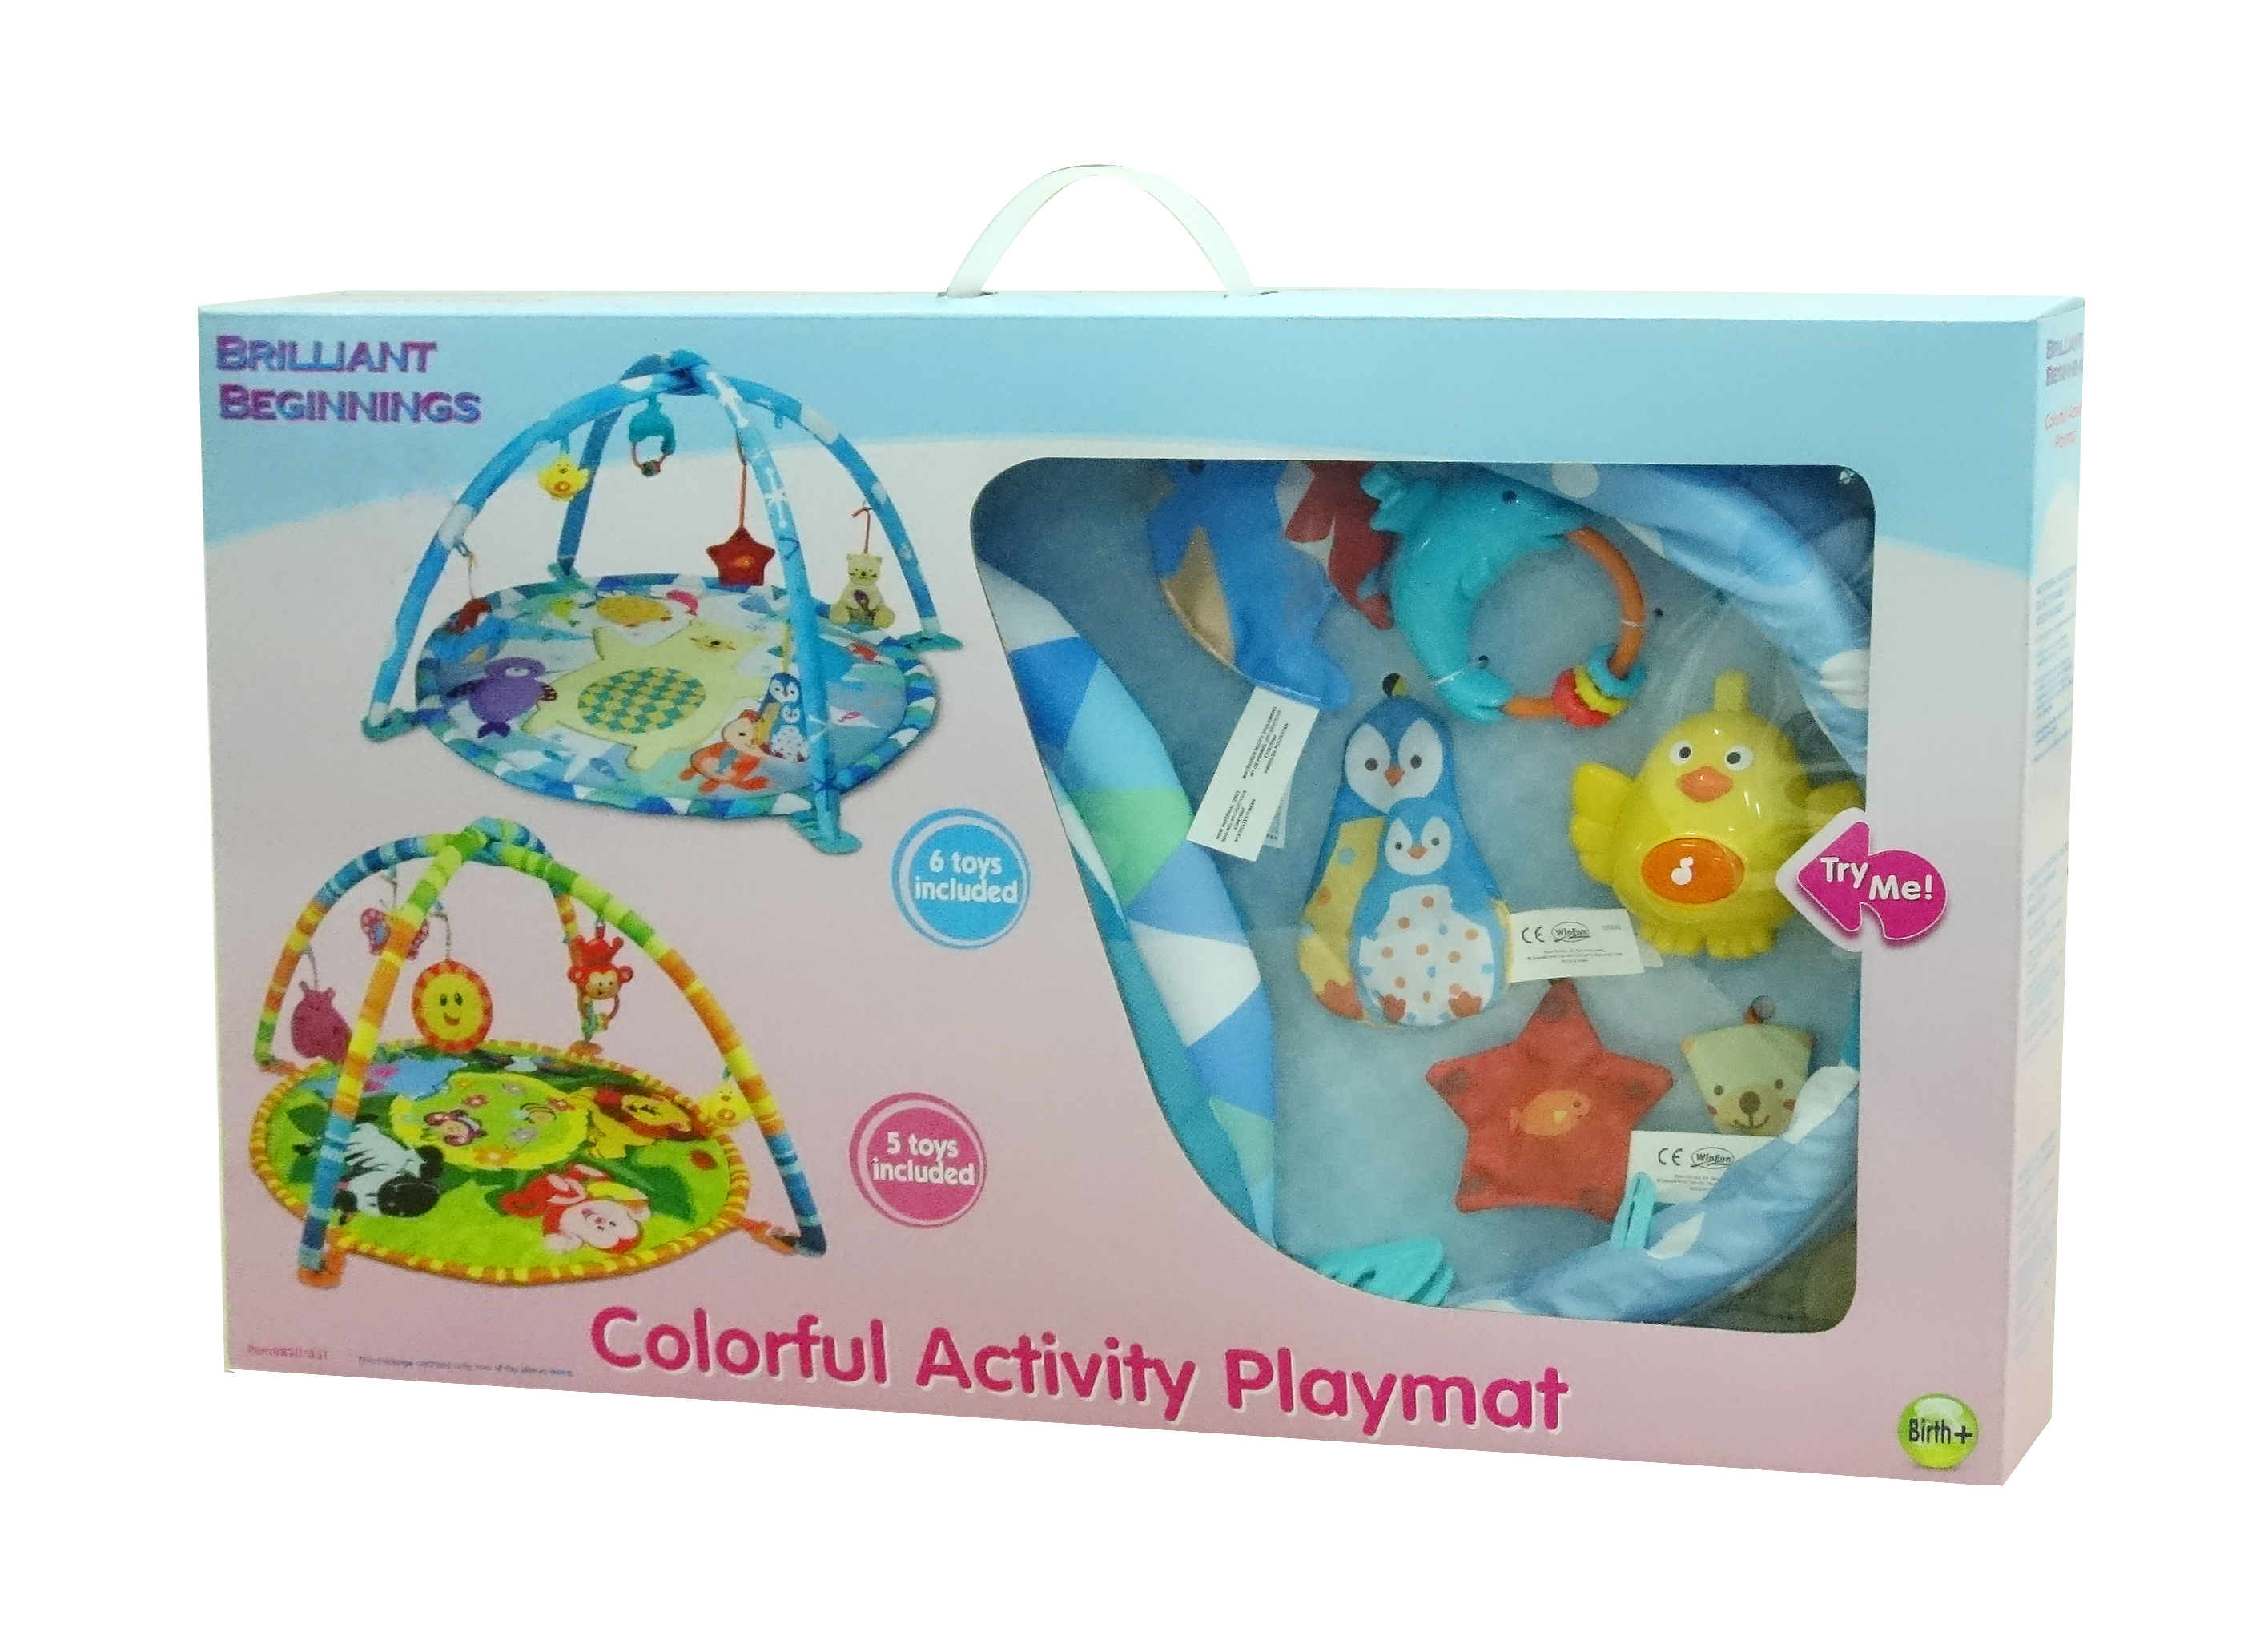 Little Virtuoso Neptune's Infant Playmat  With Lights, Sounds and Music  (Newborn to 2 Years) - image 5 of 6